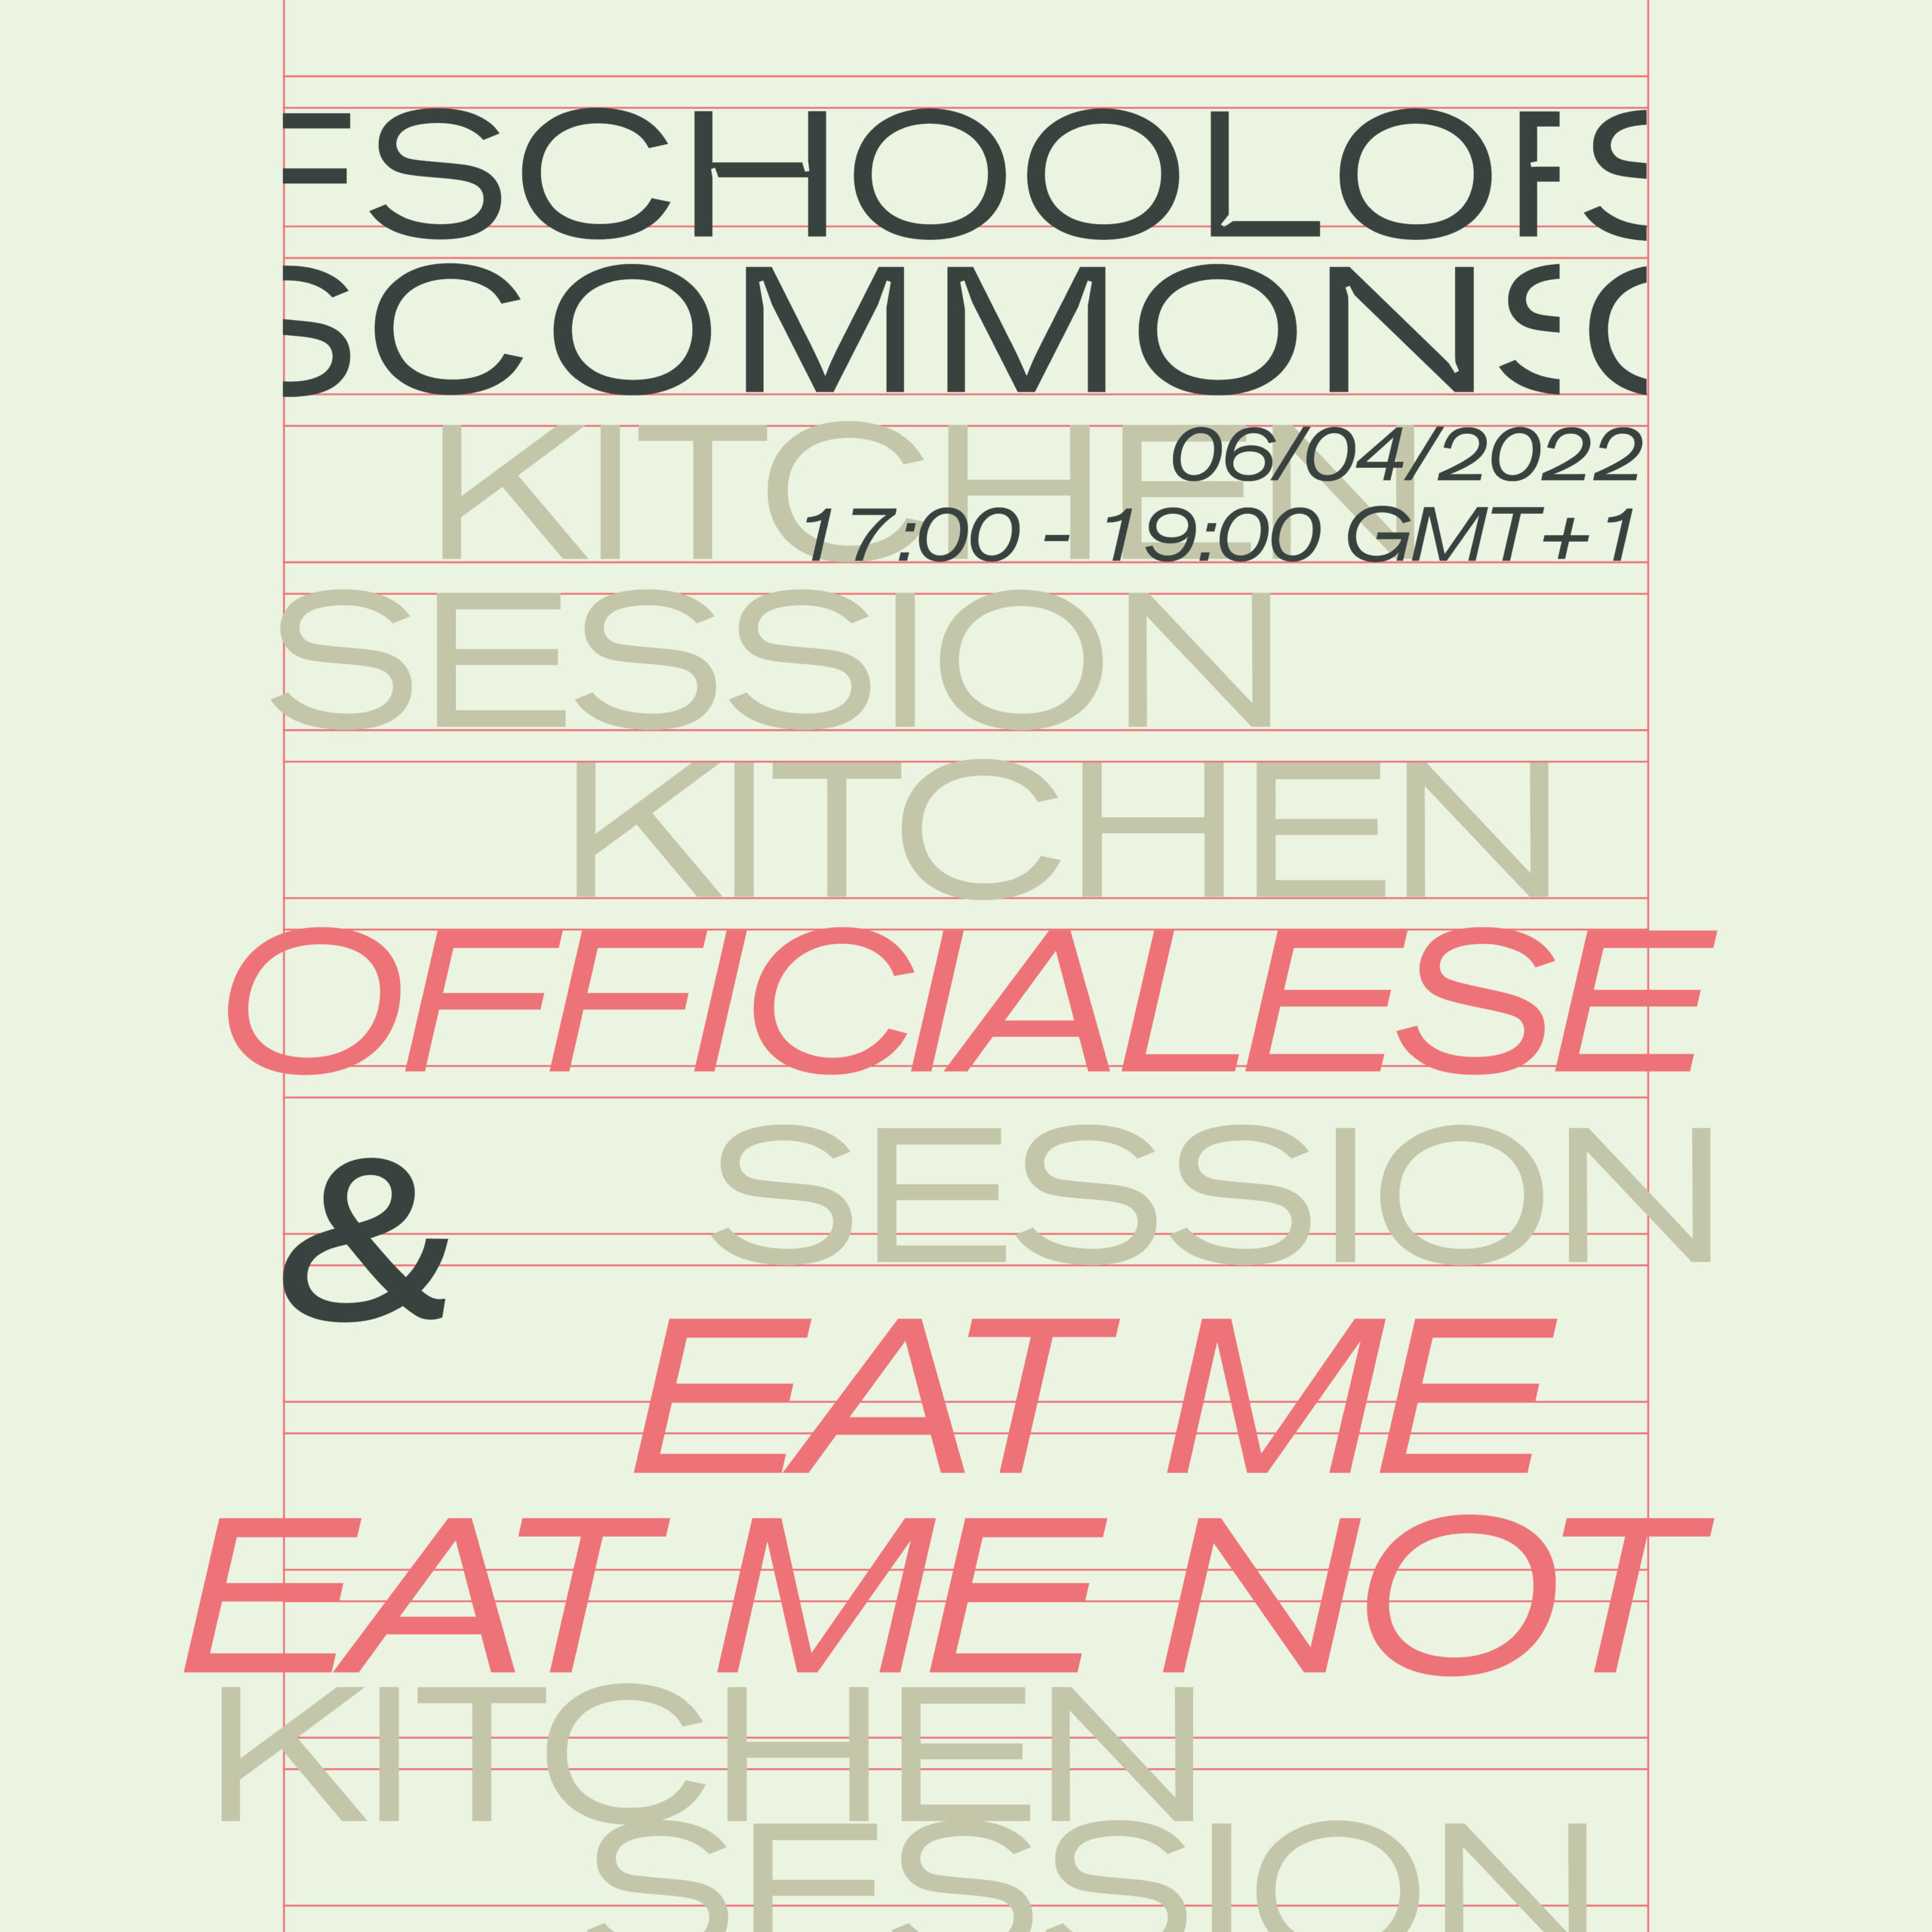 Kitchen Session: Officialese & Eat me eat me not—an art game for making kin